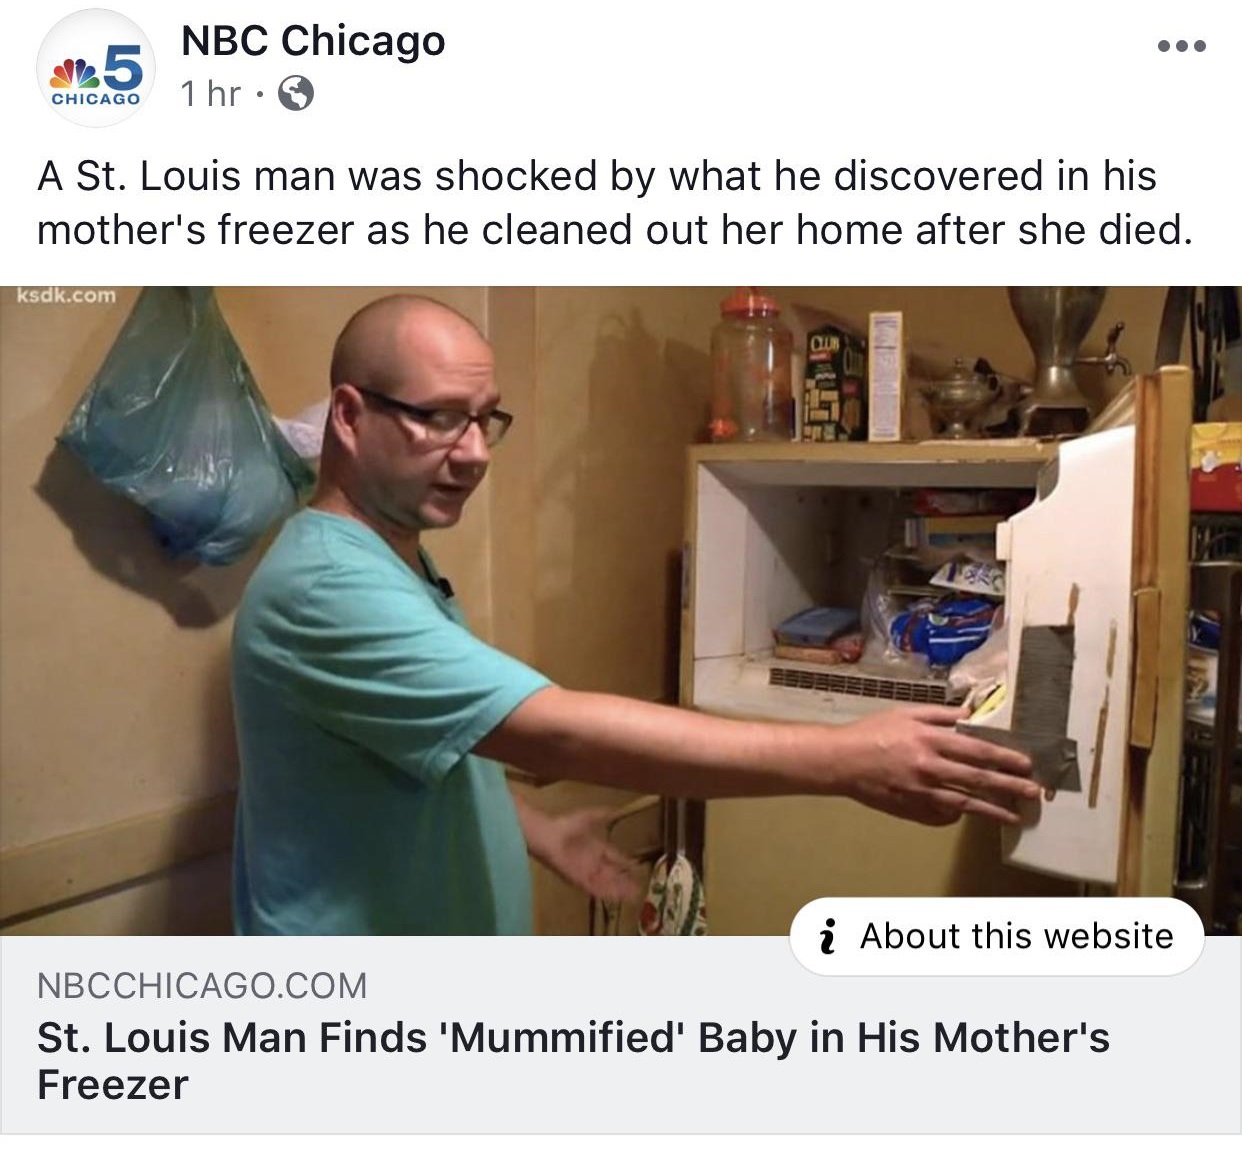 Freezer - och Nbc Chicago 1 hr. Chicago A St. Louis man was shocked by what he discovered in his mother's freezer as he cleaned out her home after she died. ksdk.com i About this website Nbcchicago.Com St. Louis Man Finds 'Mummified' Baby in His Mother's